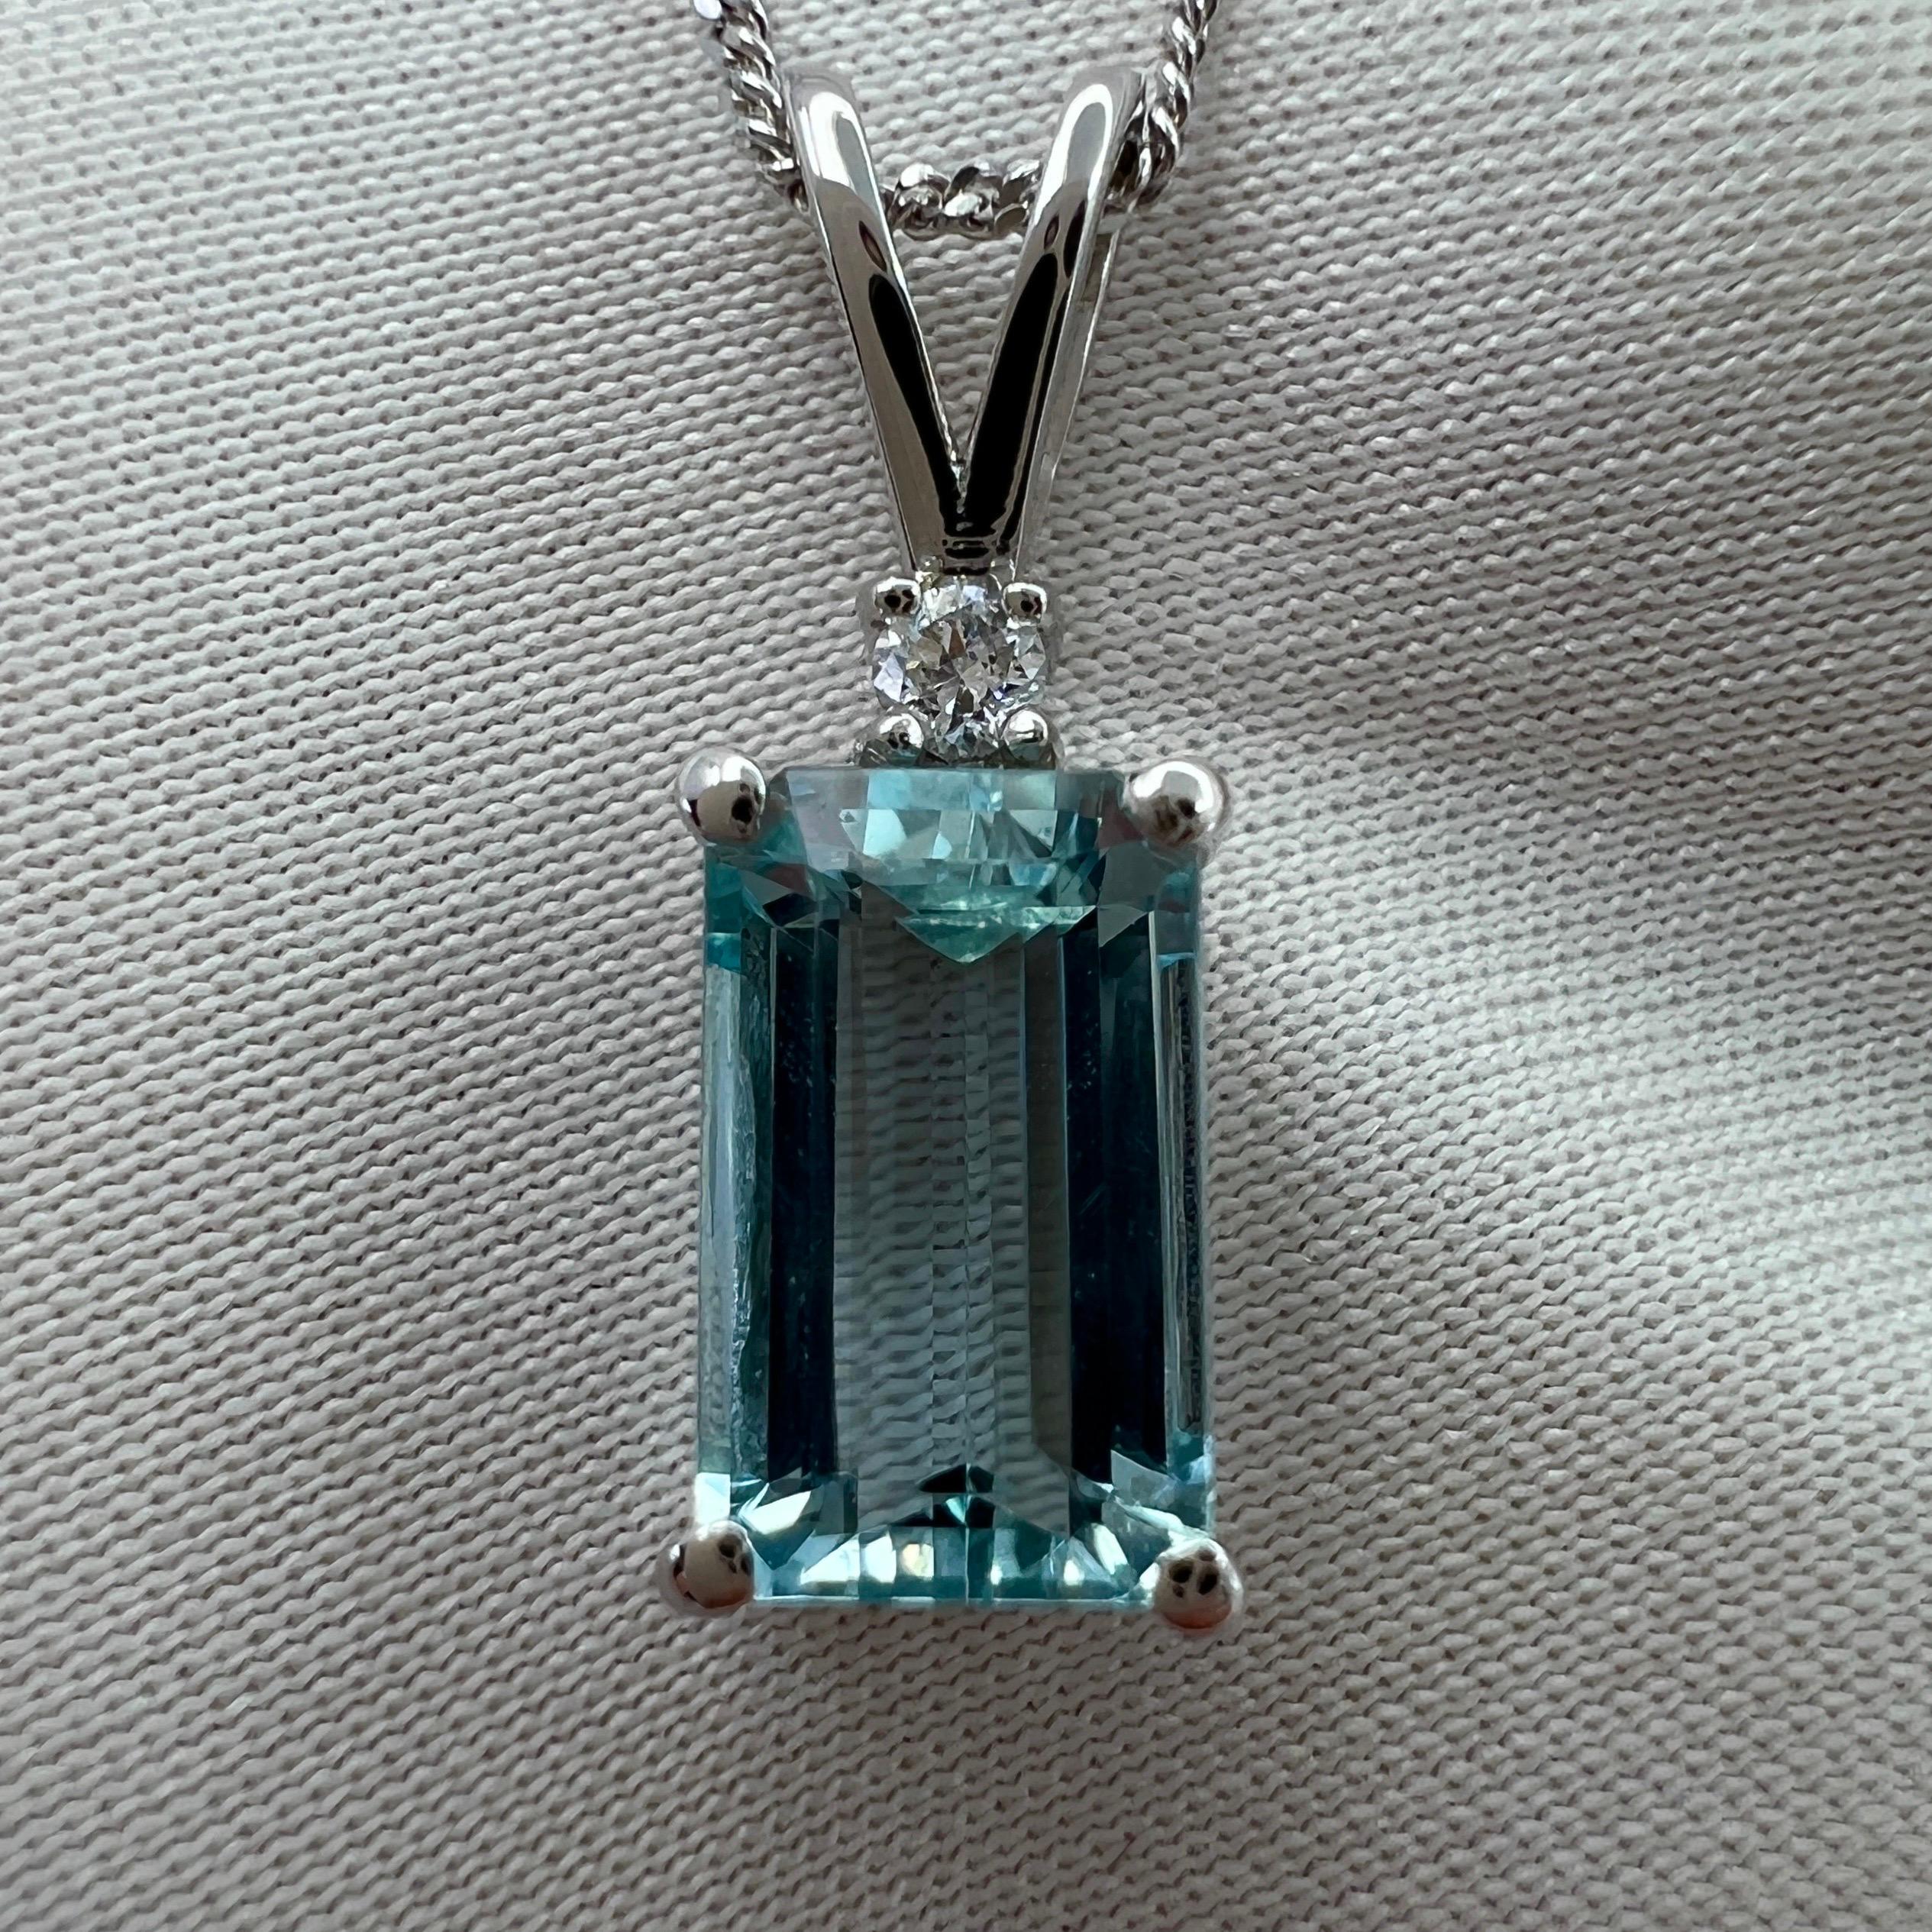 Fine Blue Emerald Cut Aquamarine & Diamond Platinum Pendant Necklace.

1.60 Carat Aquamarine with a stunning fine blue colour and excellent clarity, very clean stone with only some very small natural inclusions visible when looking closely.
Set in a